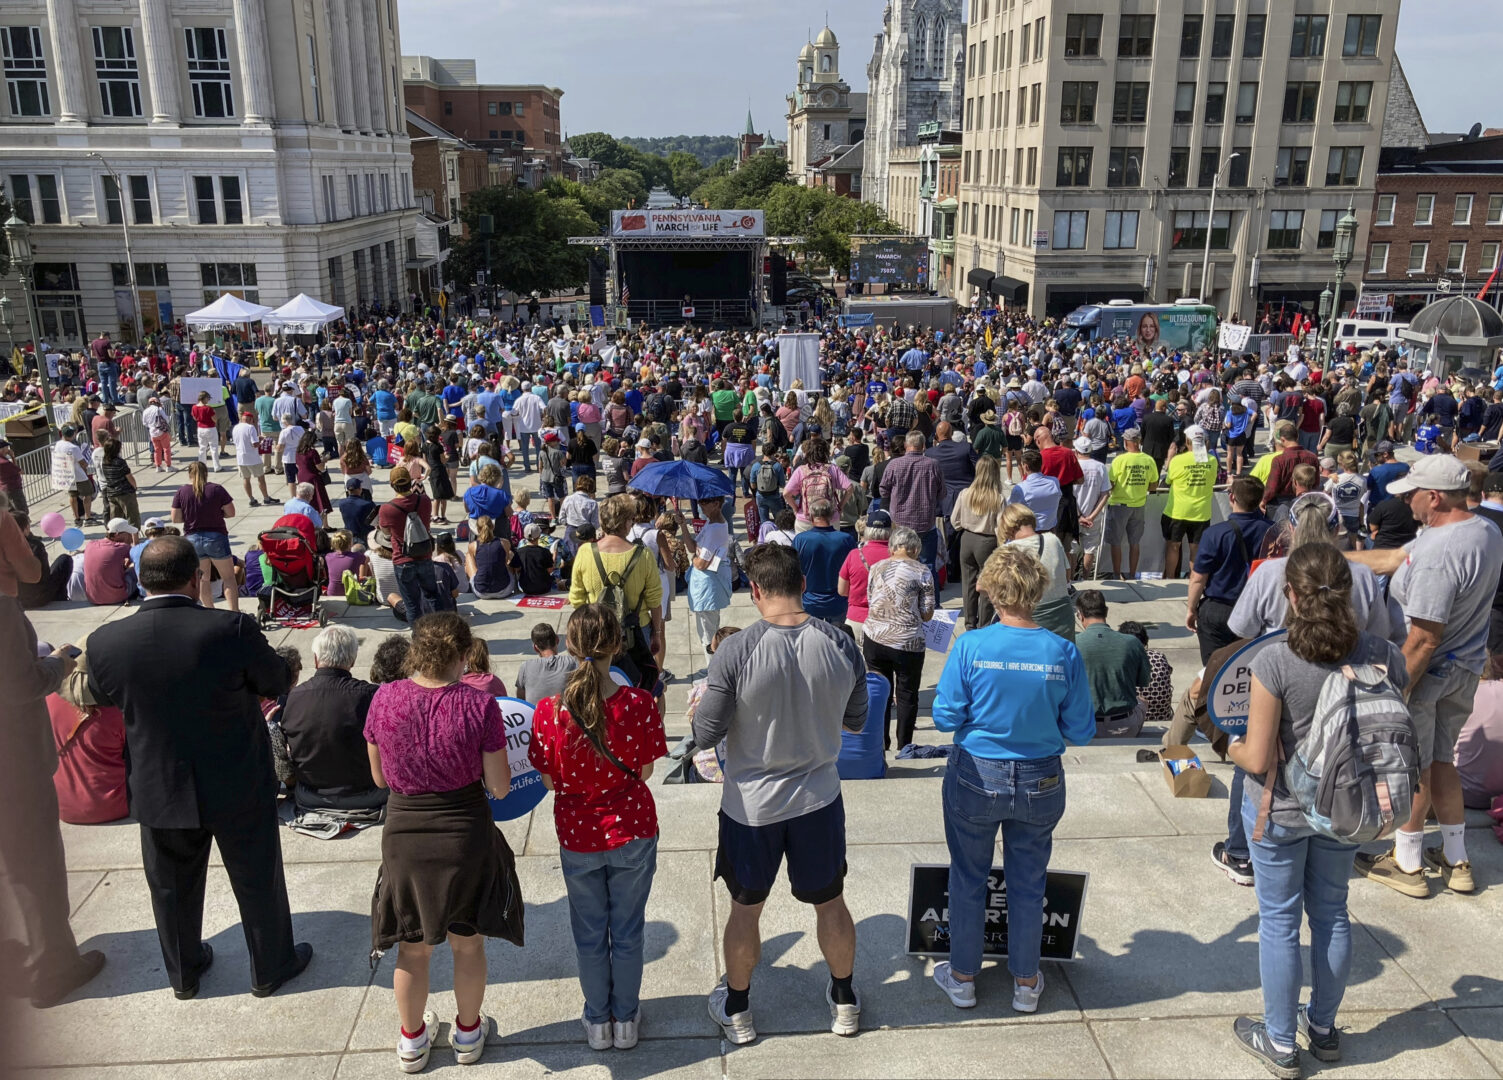 Anti-abortion supporters gather on the front steps of the state Capitol during the Pennsylvania March for Life rally, Monday, Sept. 19, 2022, in Harrisburg, Penn.